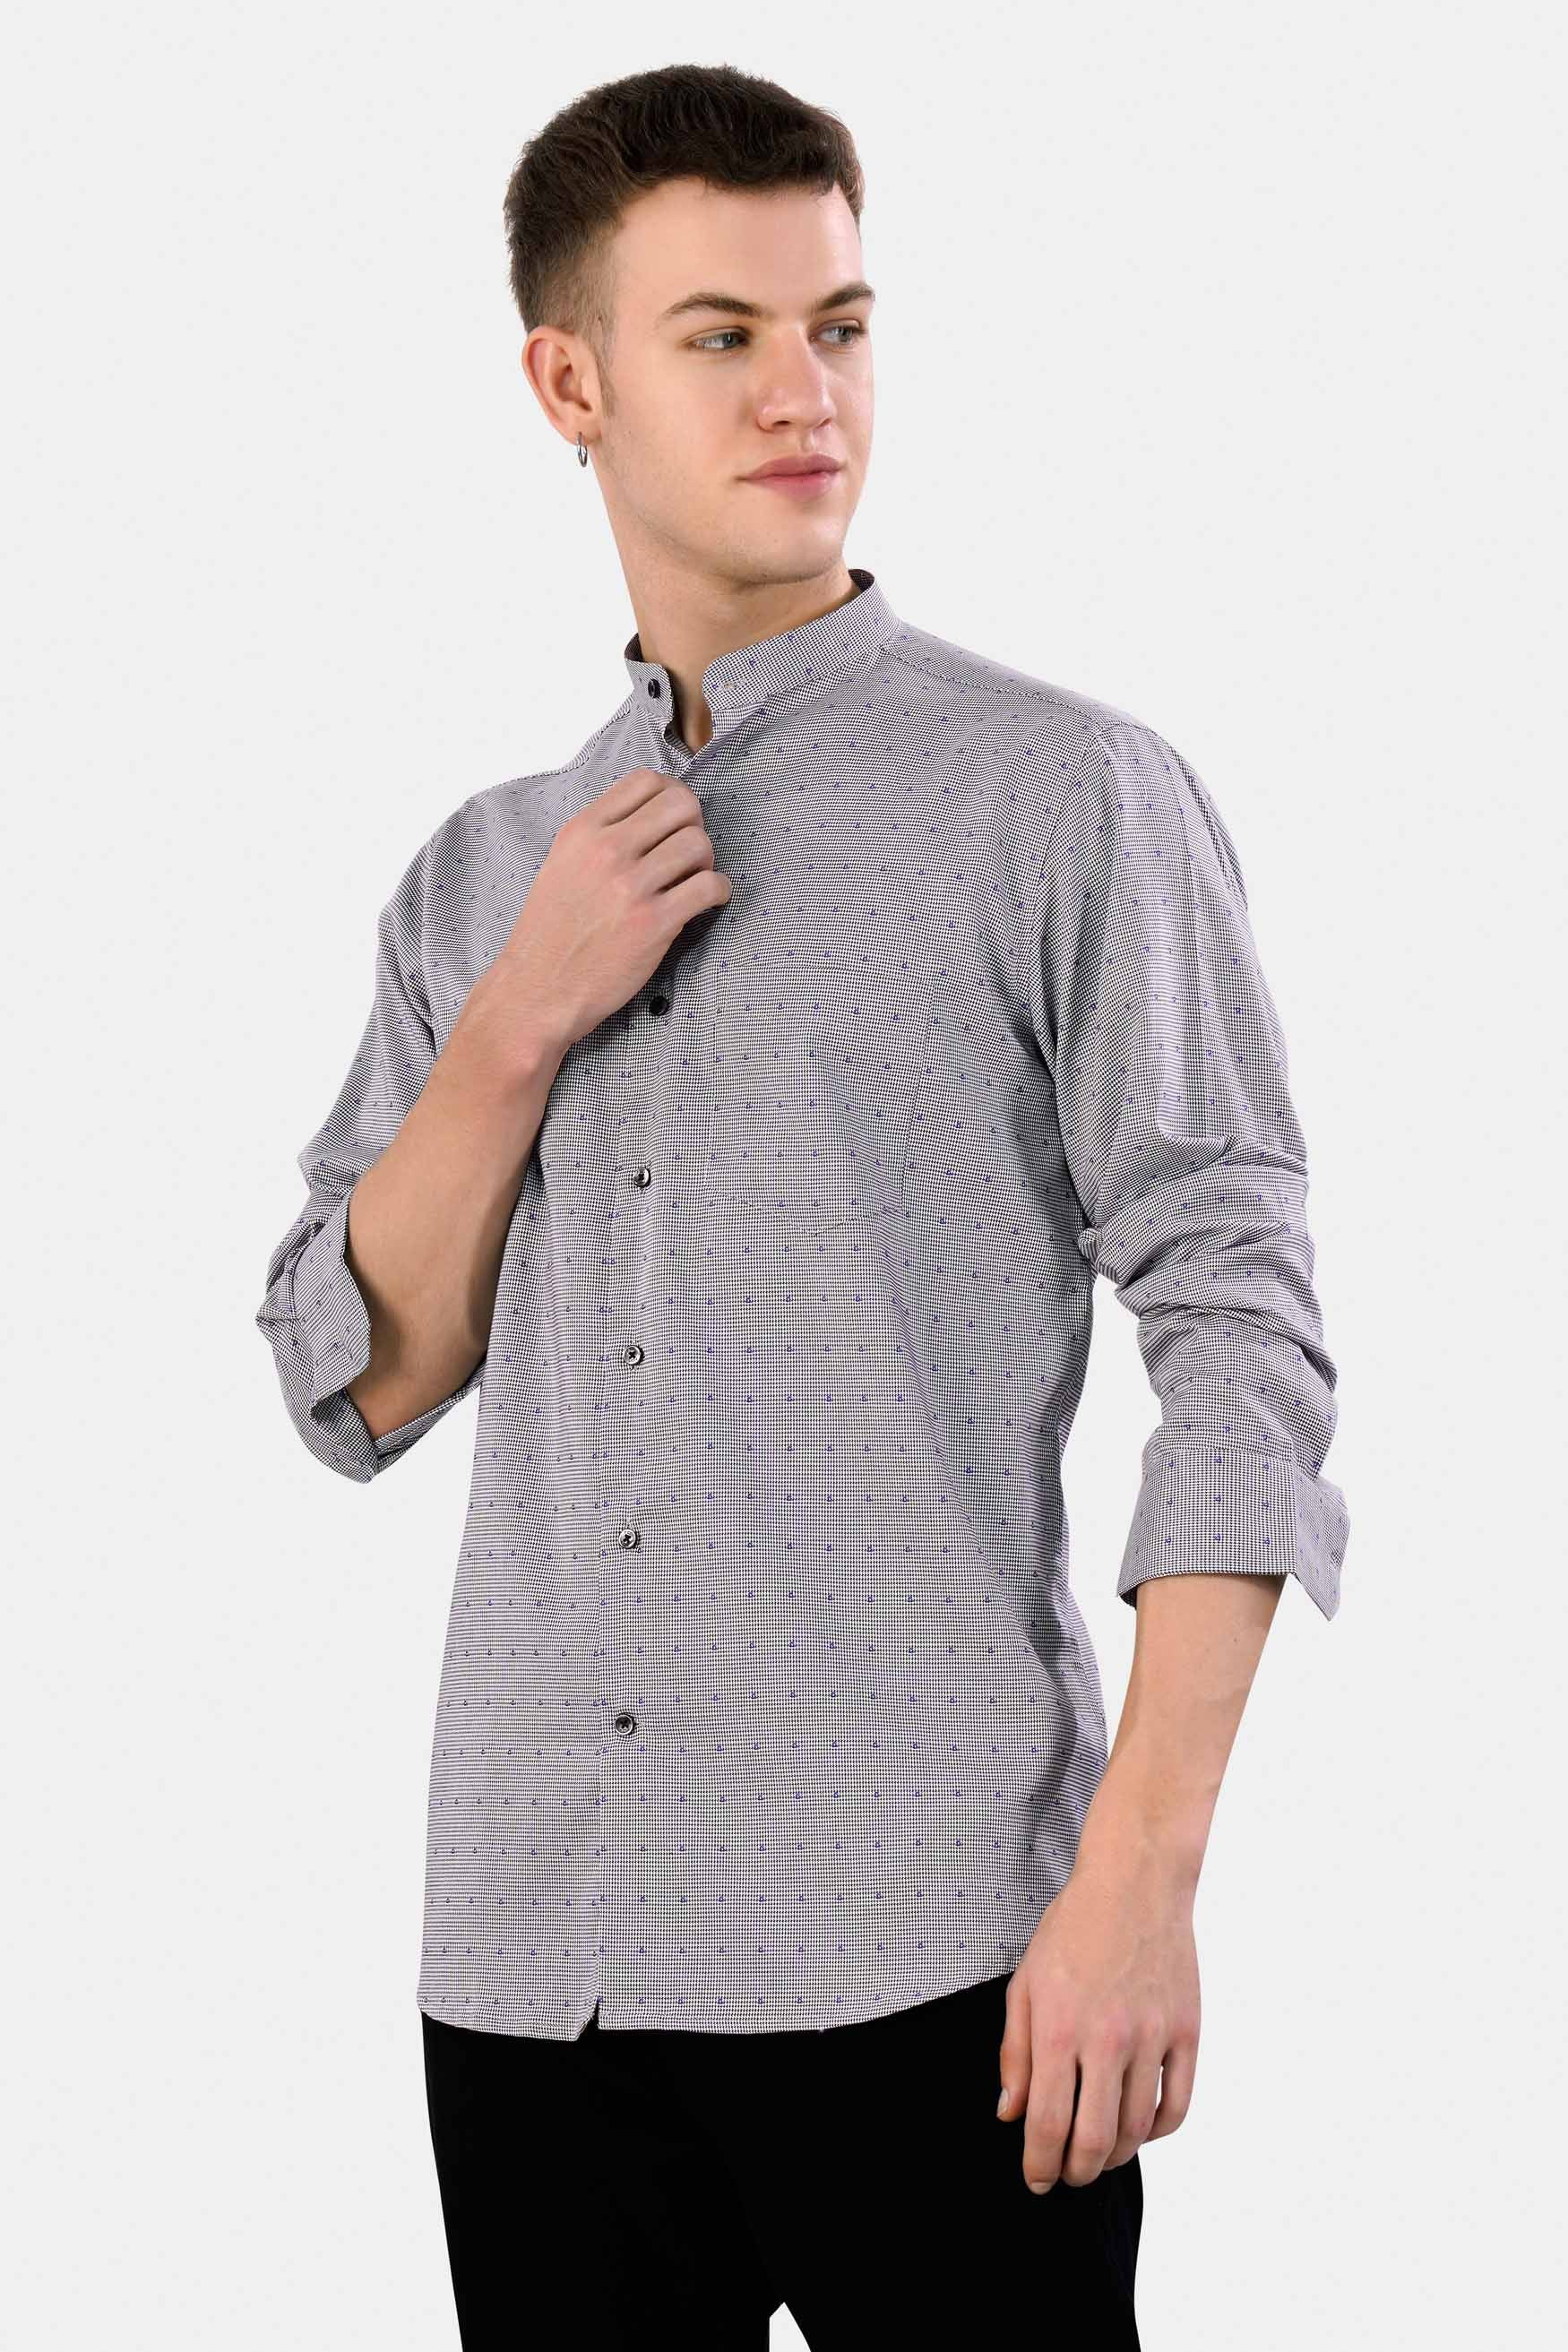 Concord Gray and Scampi Blue Houndstooth Textured Premium Giza Cotton Shirt